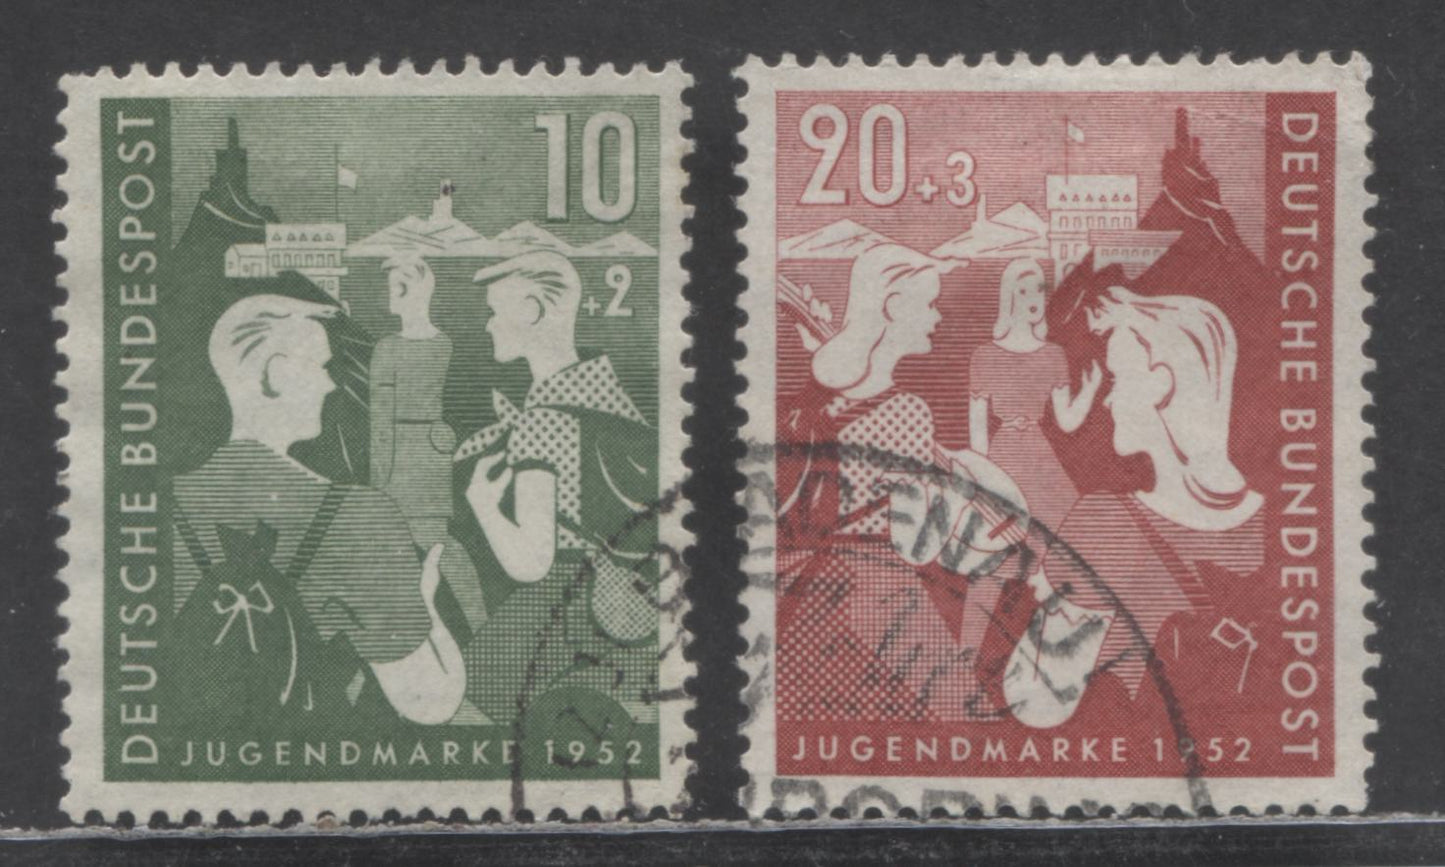 Lot 32 Germany SC#B325-B326 1952 Portrait Semi Postals, 2 Very Fine Used Singles, Click on Listing to See ALL Pictures, 2022 Scott Cat. $36